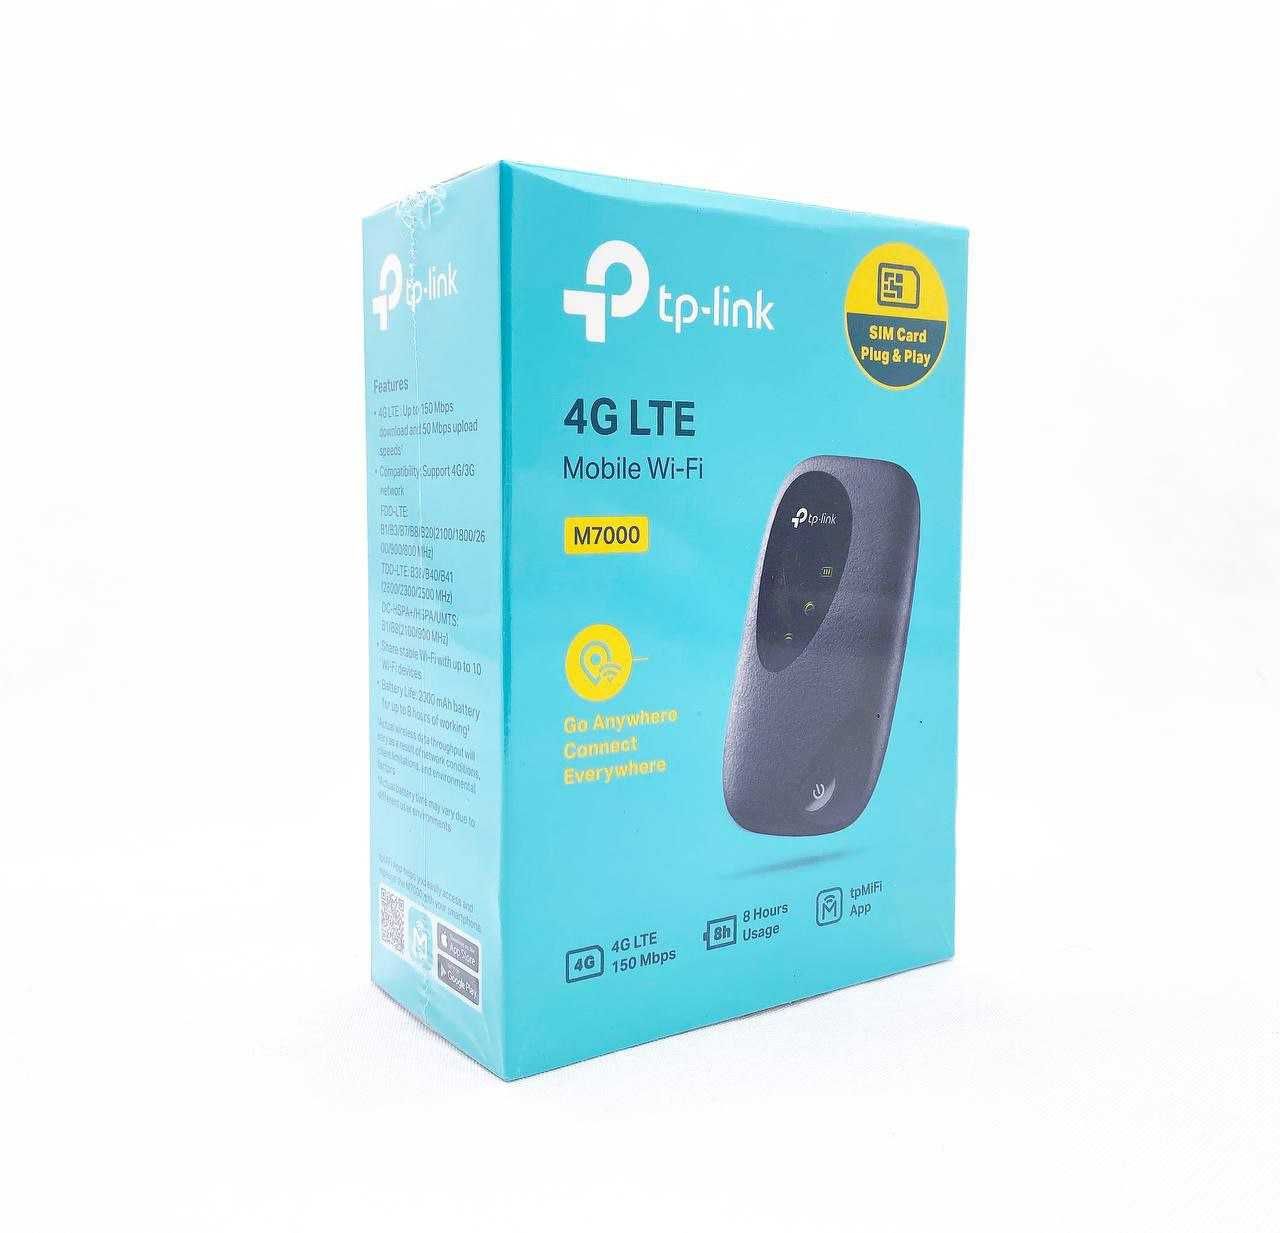 Wifi 4G LTE TP-Link M7000 /  4G Wi-Fi routeri